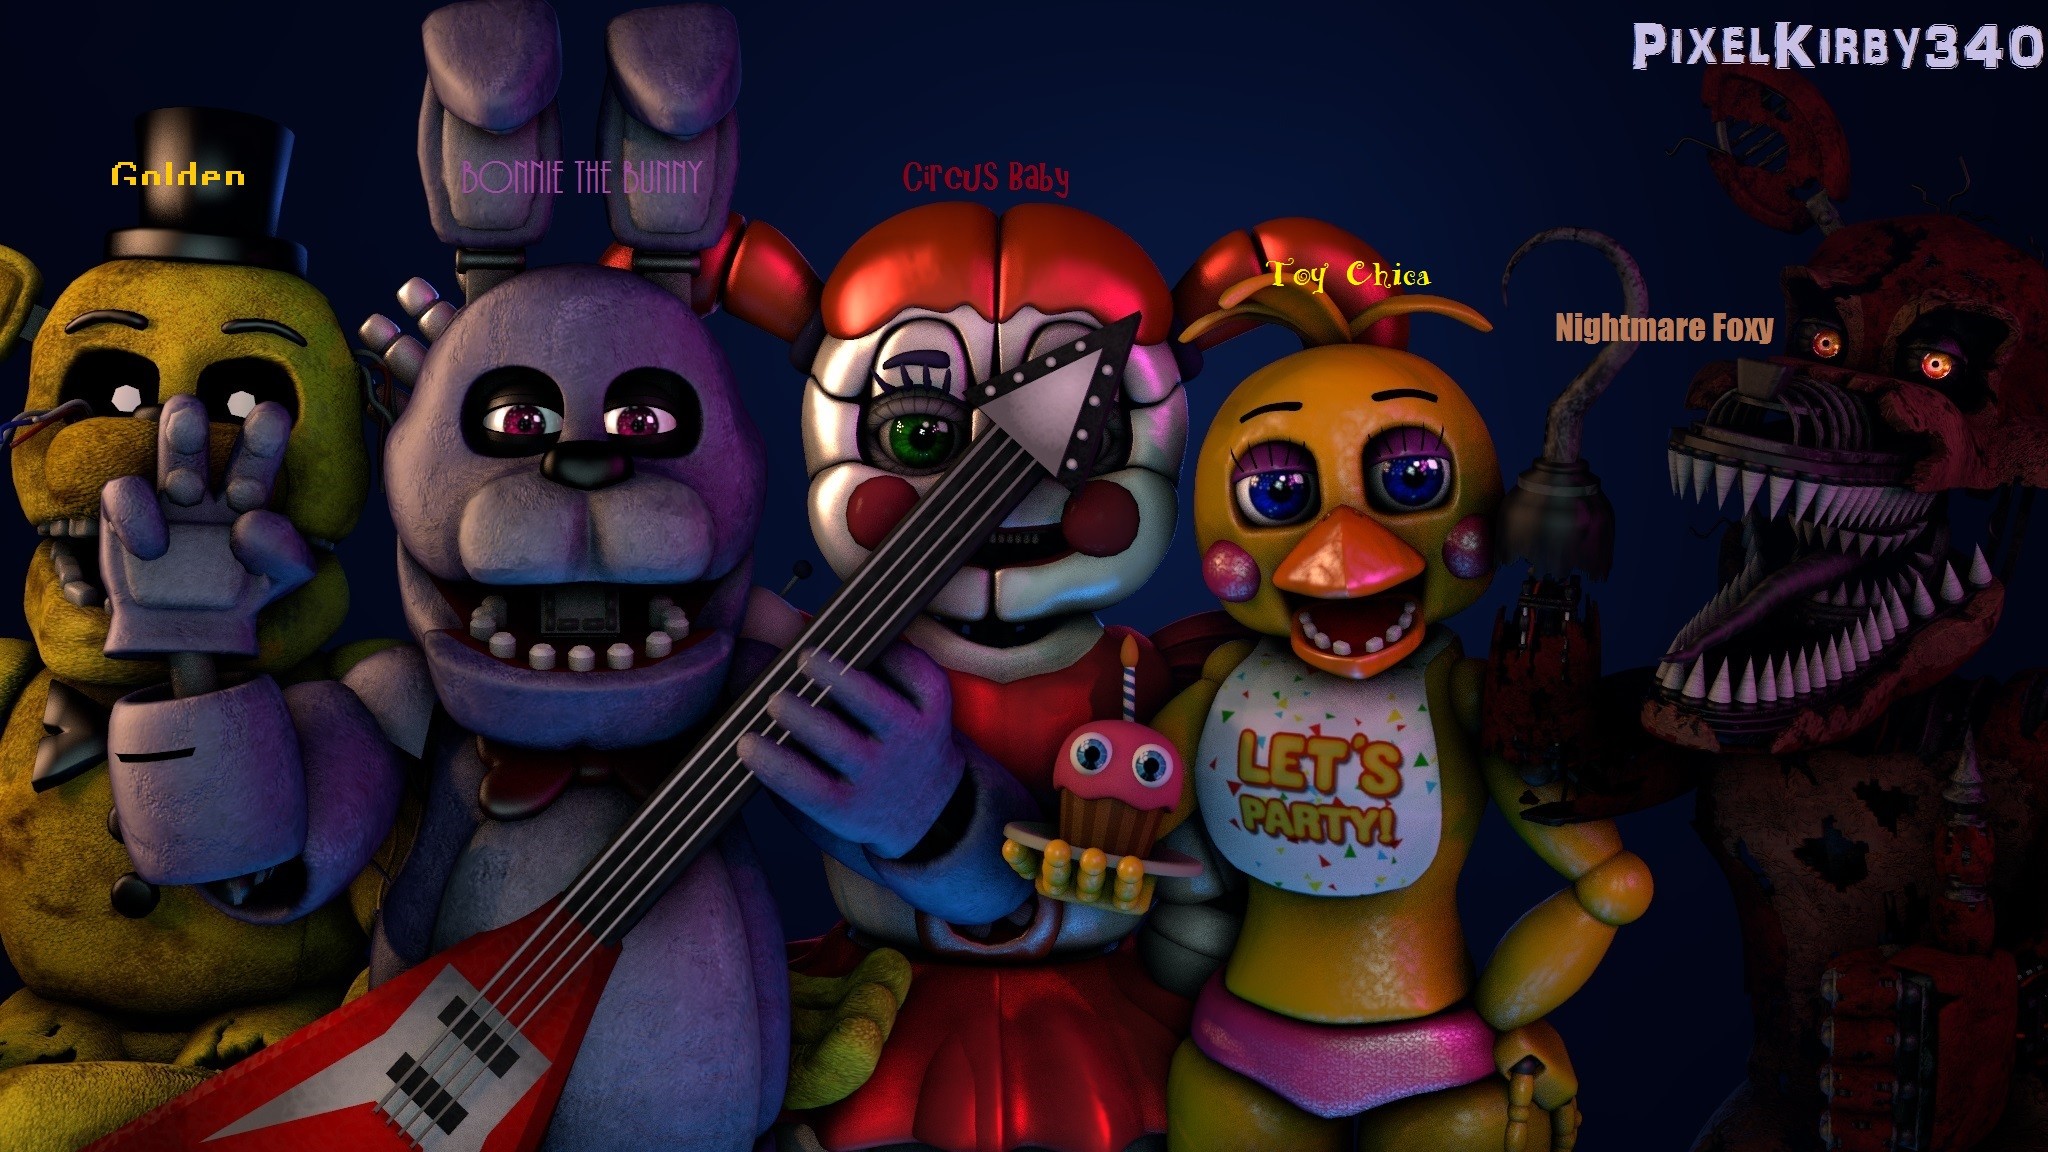 My Favourite FNAF Characters by PixelKirby340 on DeviantArt f naf all characters wallpaper